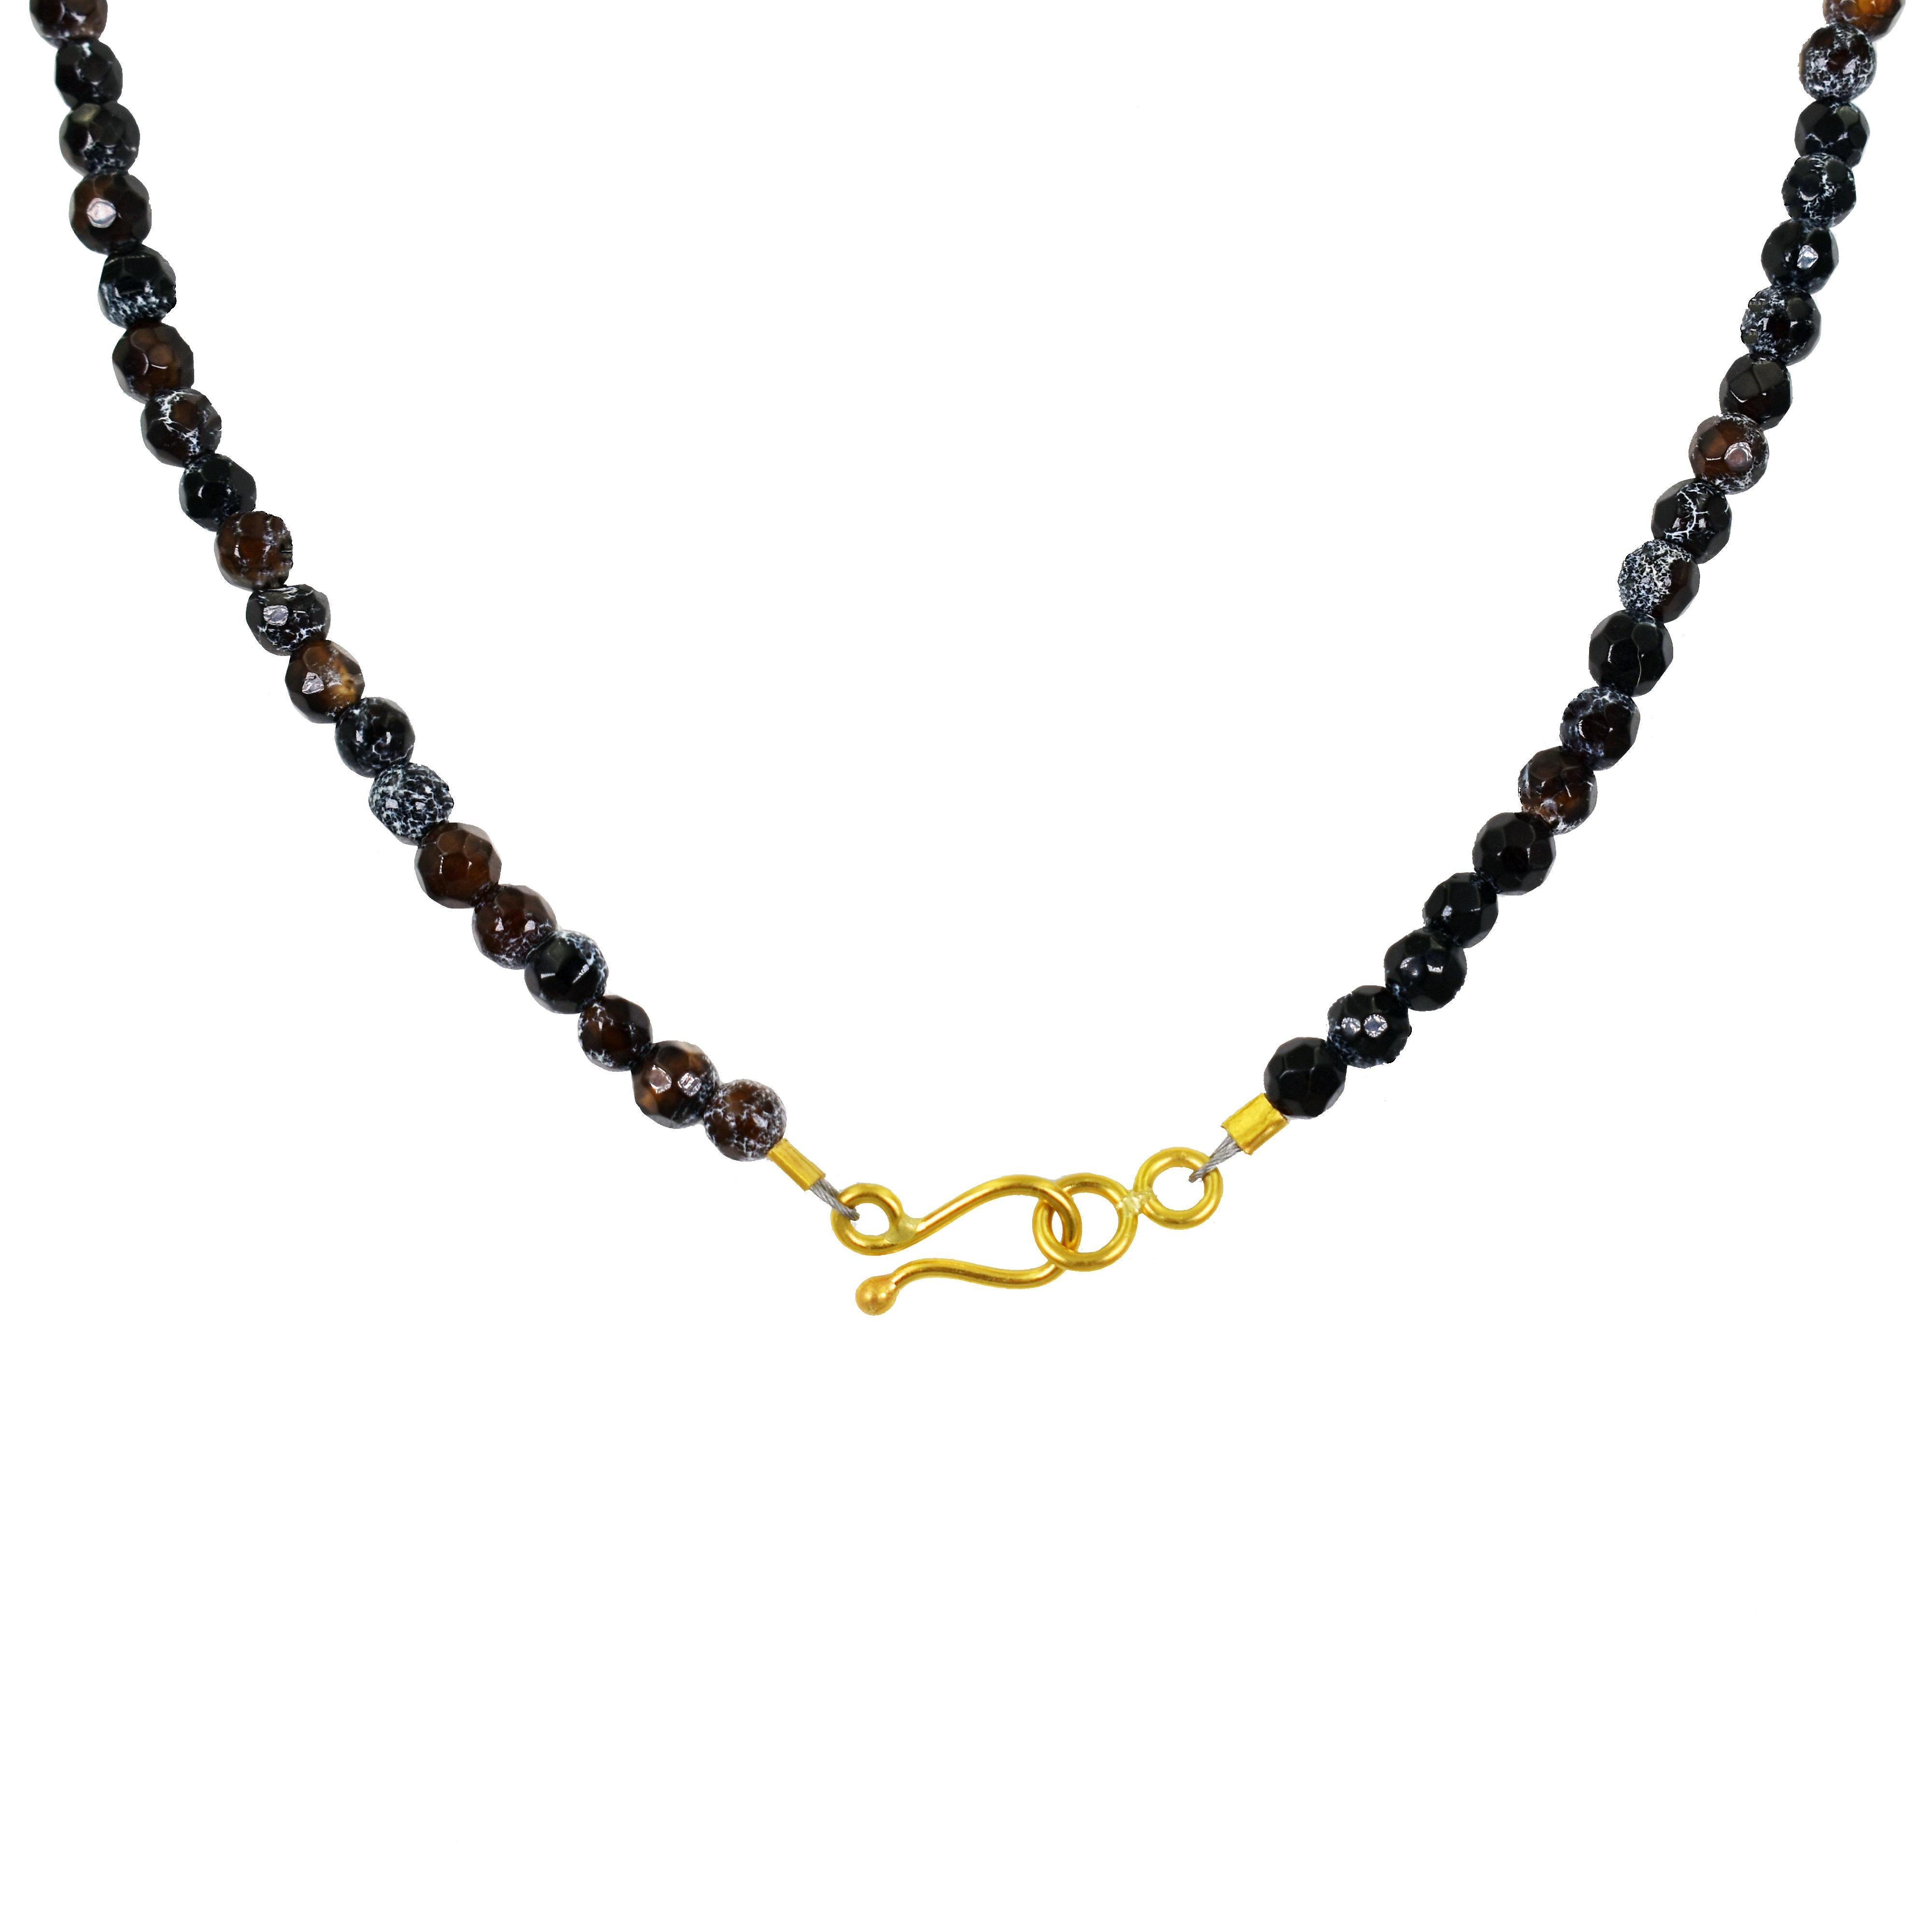 Authentic ancient Roman bronze key and 22k yellow gold dangle pendant on faceted Fire Agate beaded necklace. Beaded necklace is 15.75 inches in length. Dangle pendant is 1.69 inches in total length. Necklace is finished with a 22k gold hook closure.